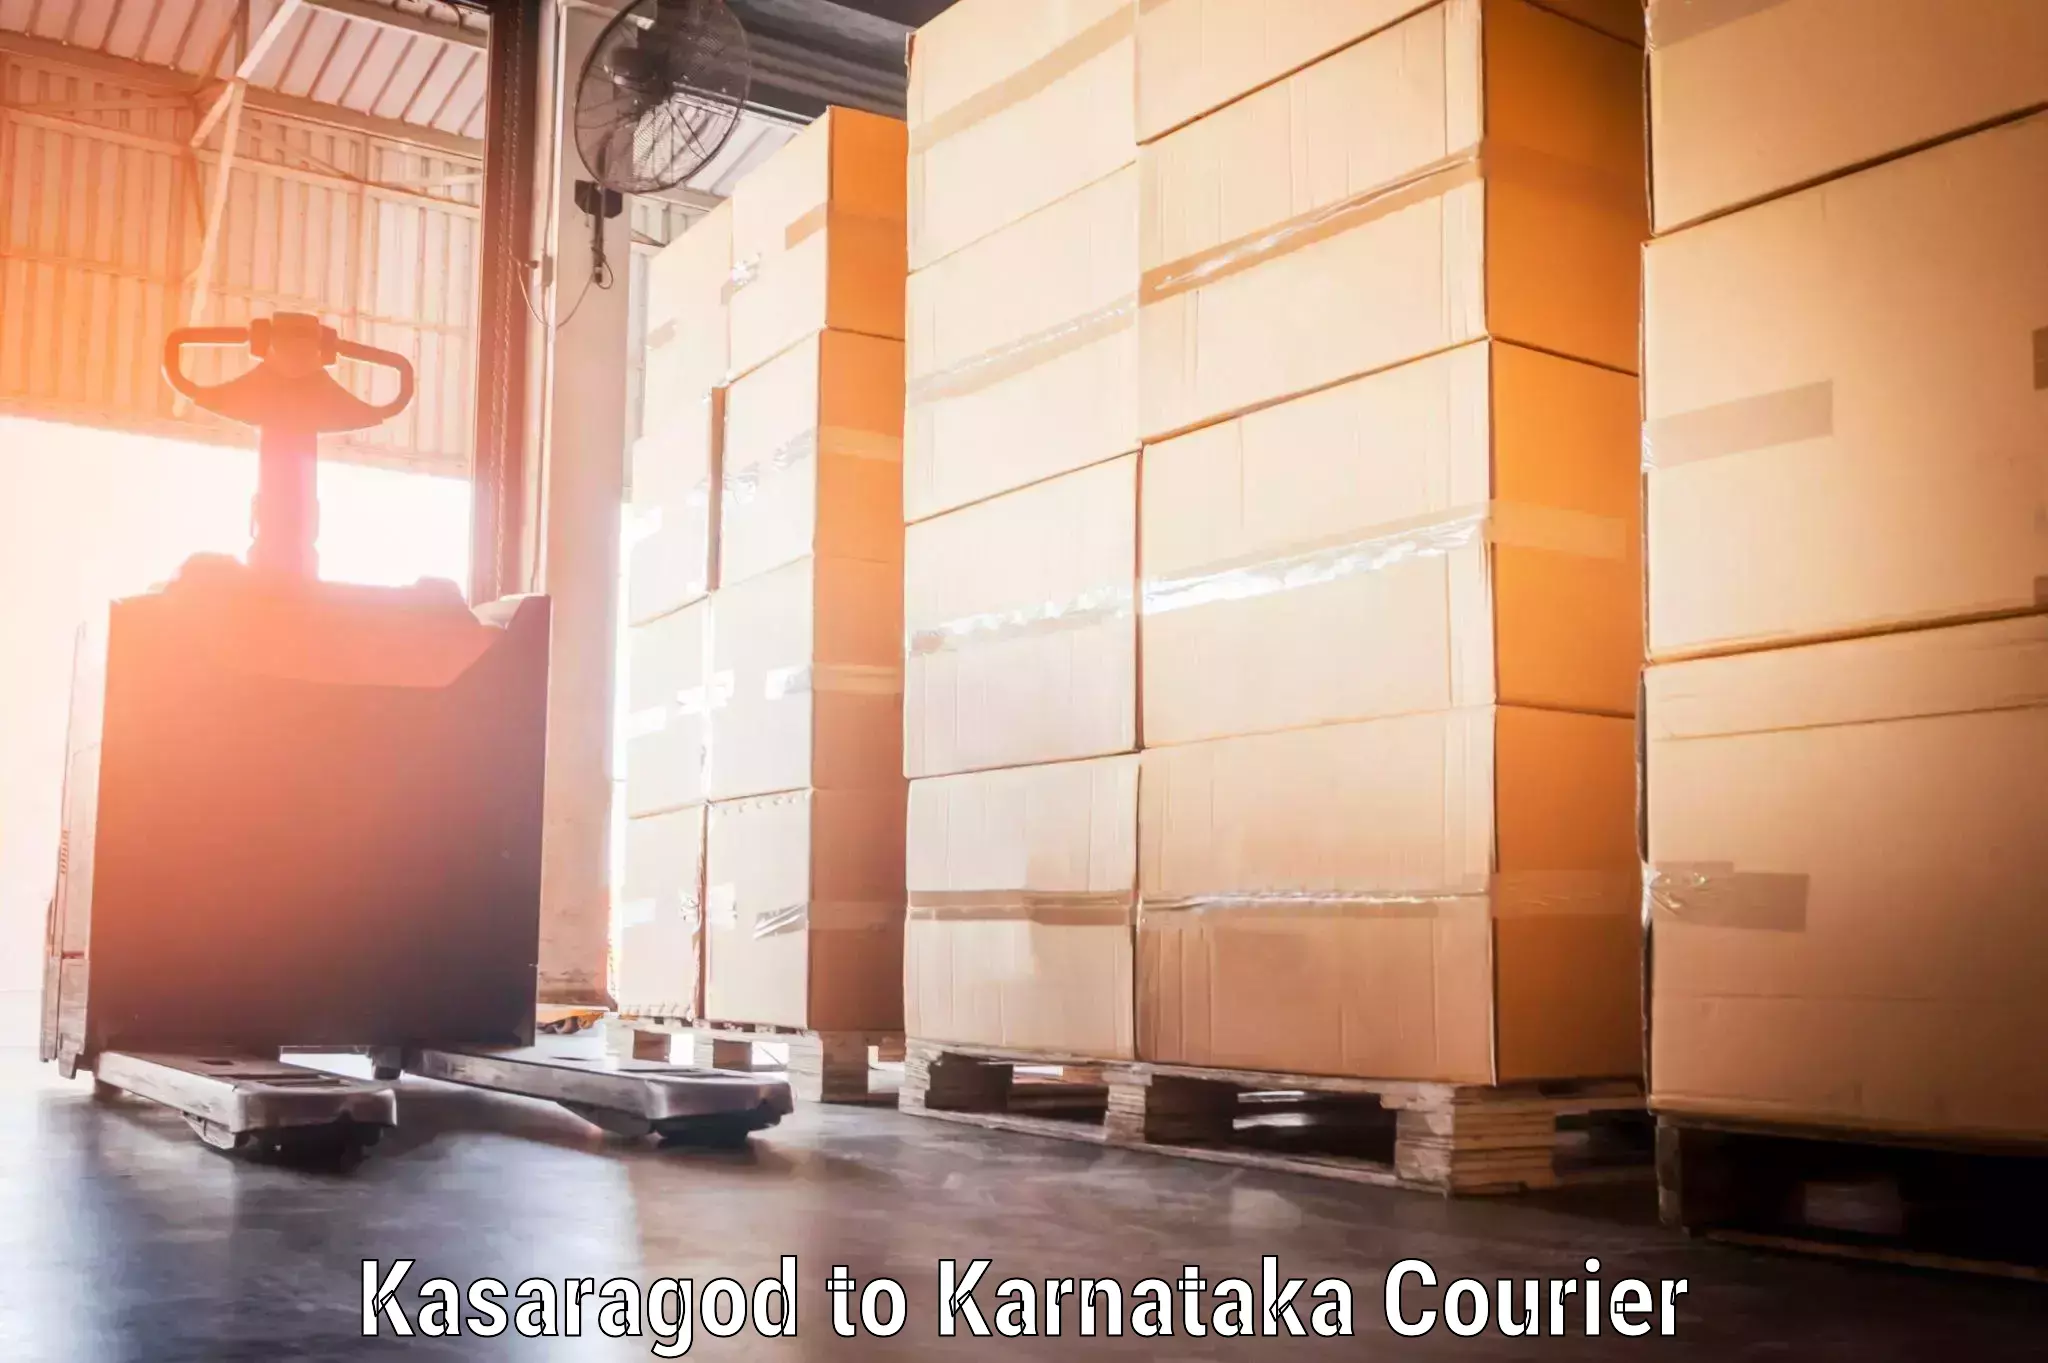 Baggage transport cost Kasaragod to Manipal